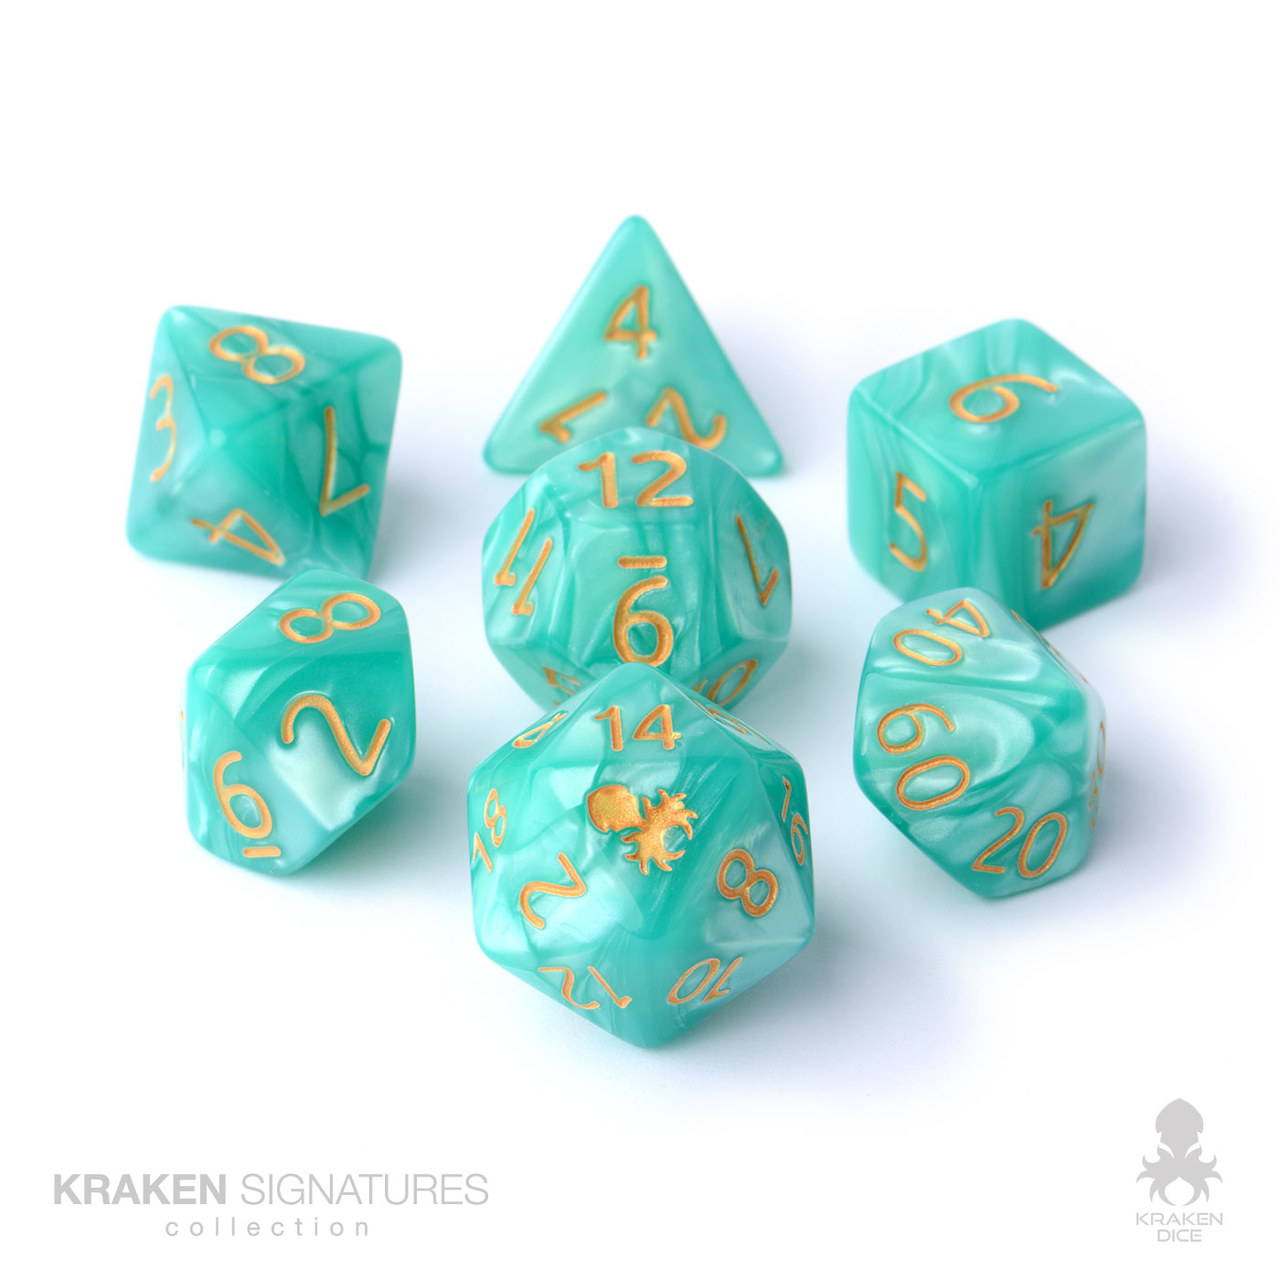 DND dice that are mint green and shiny